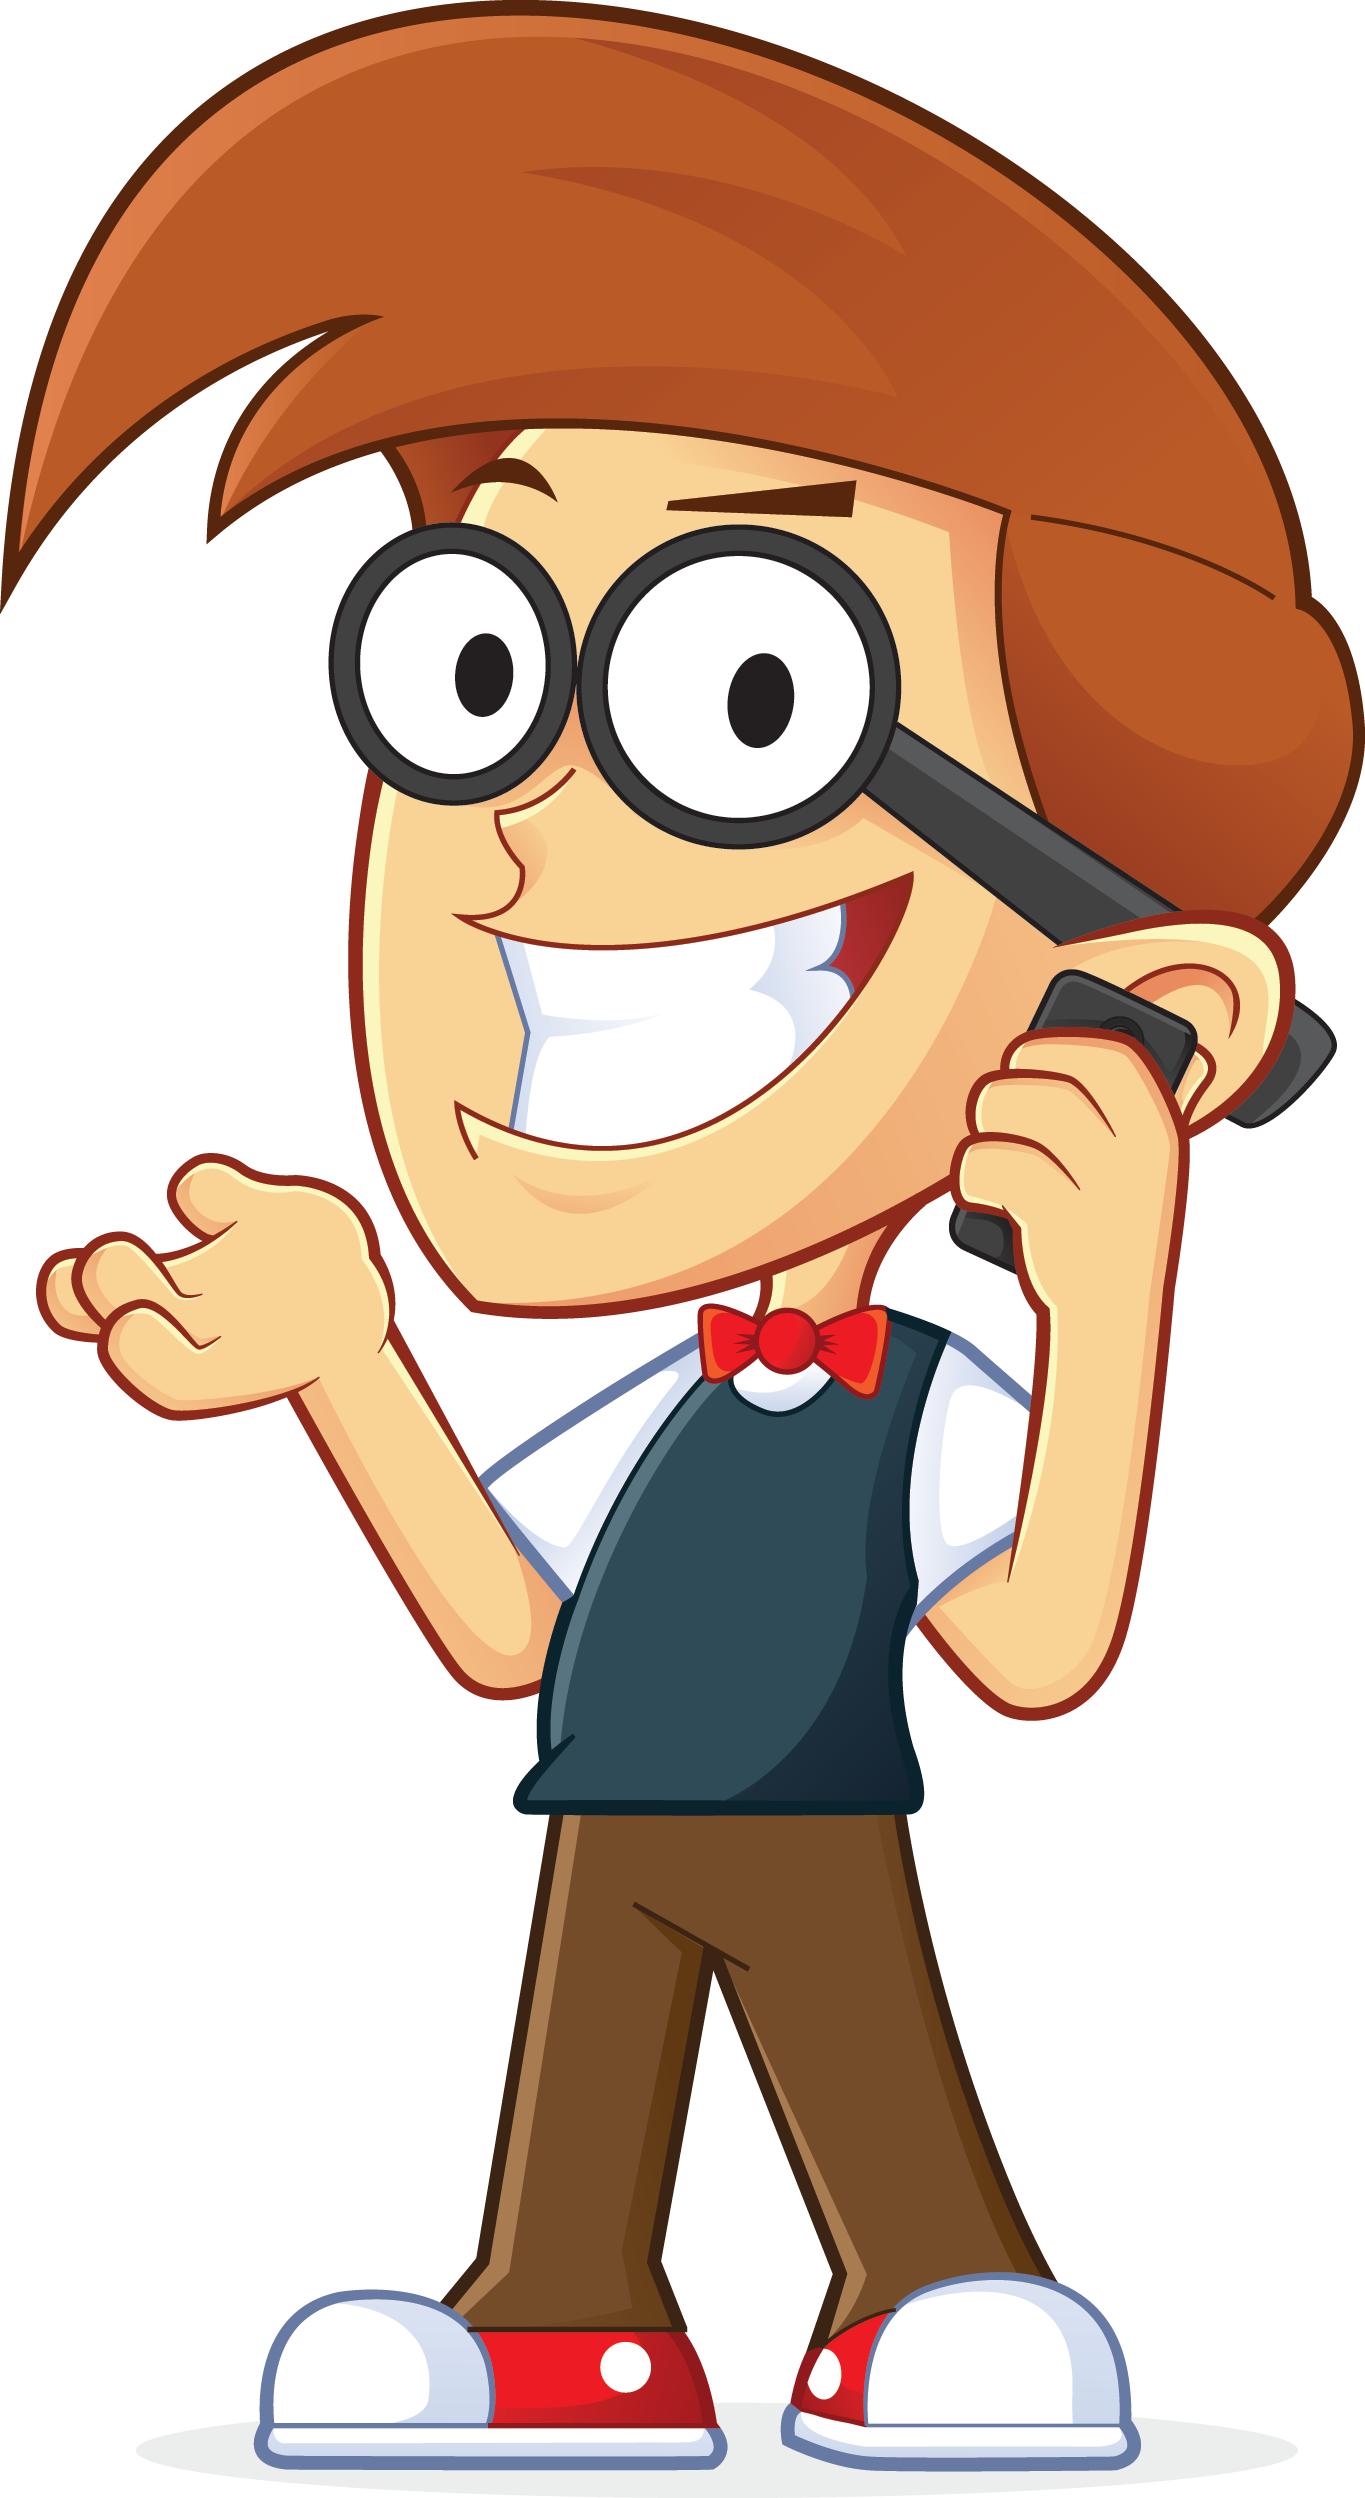 Image for free nerd. Hops clipart playground game